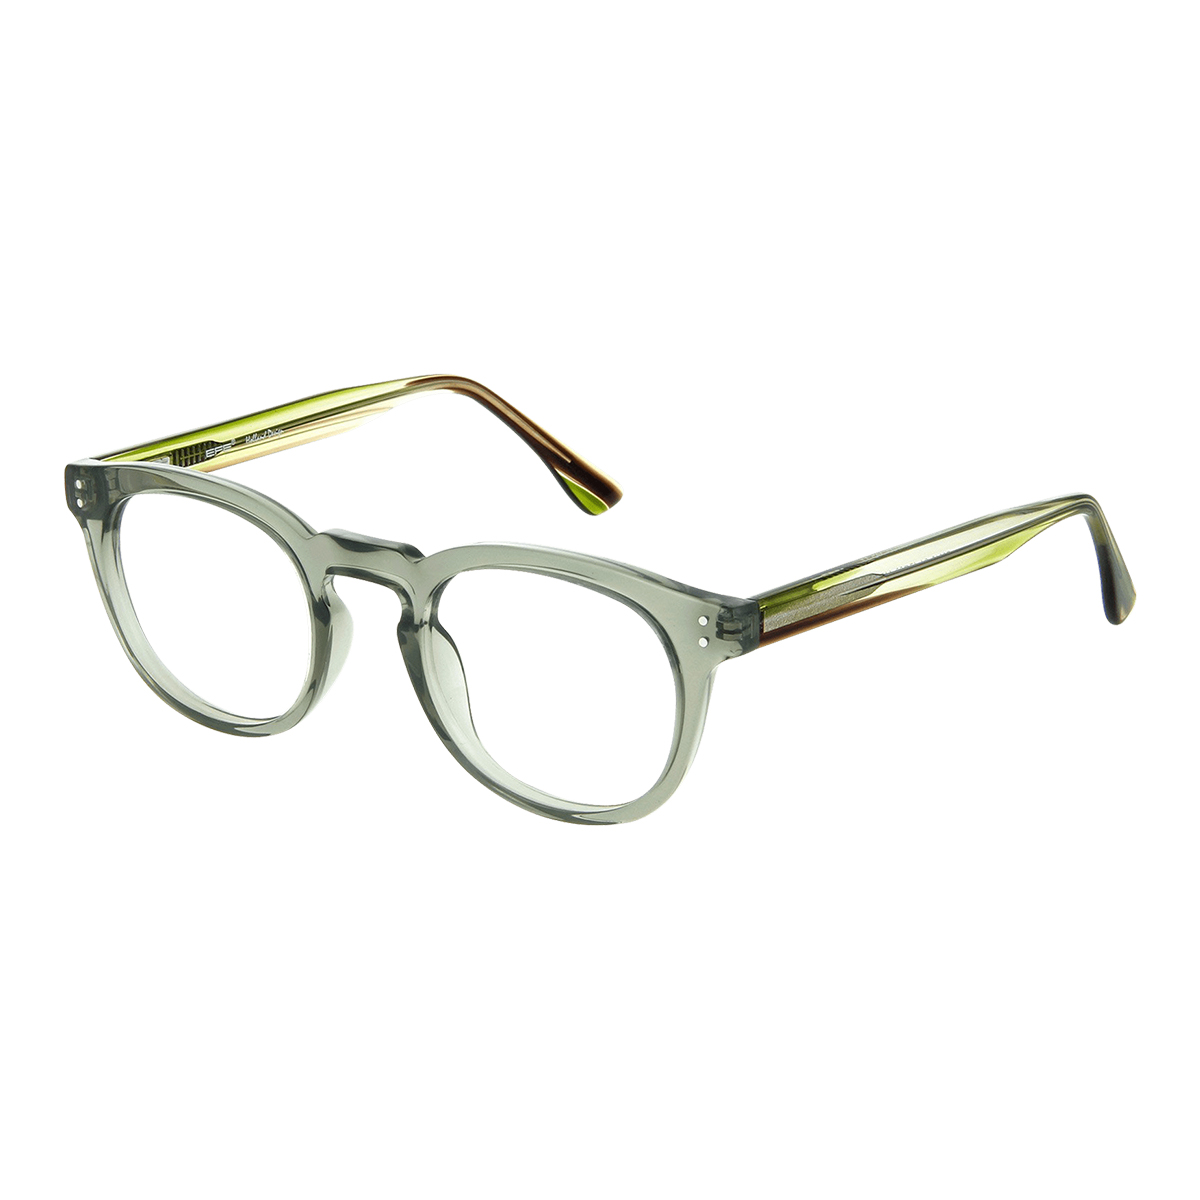 Malis - Round Green Reading Glasses for Women